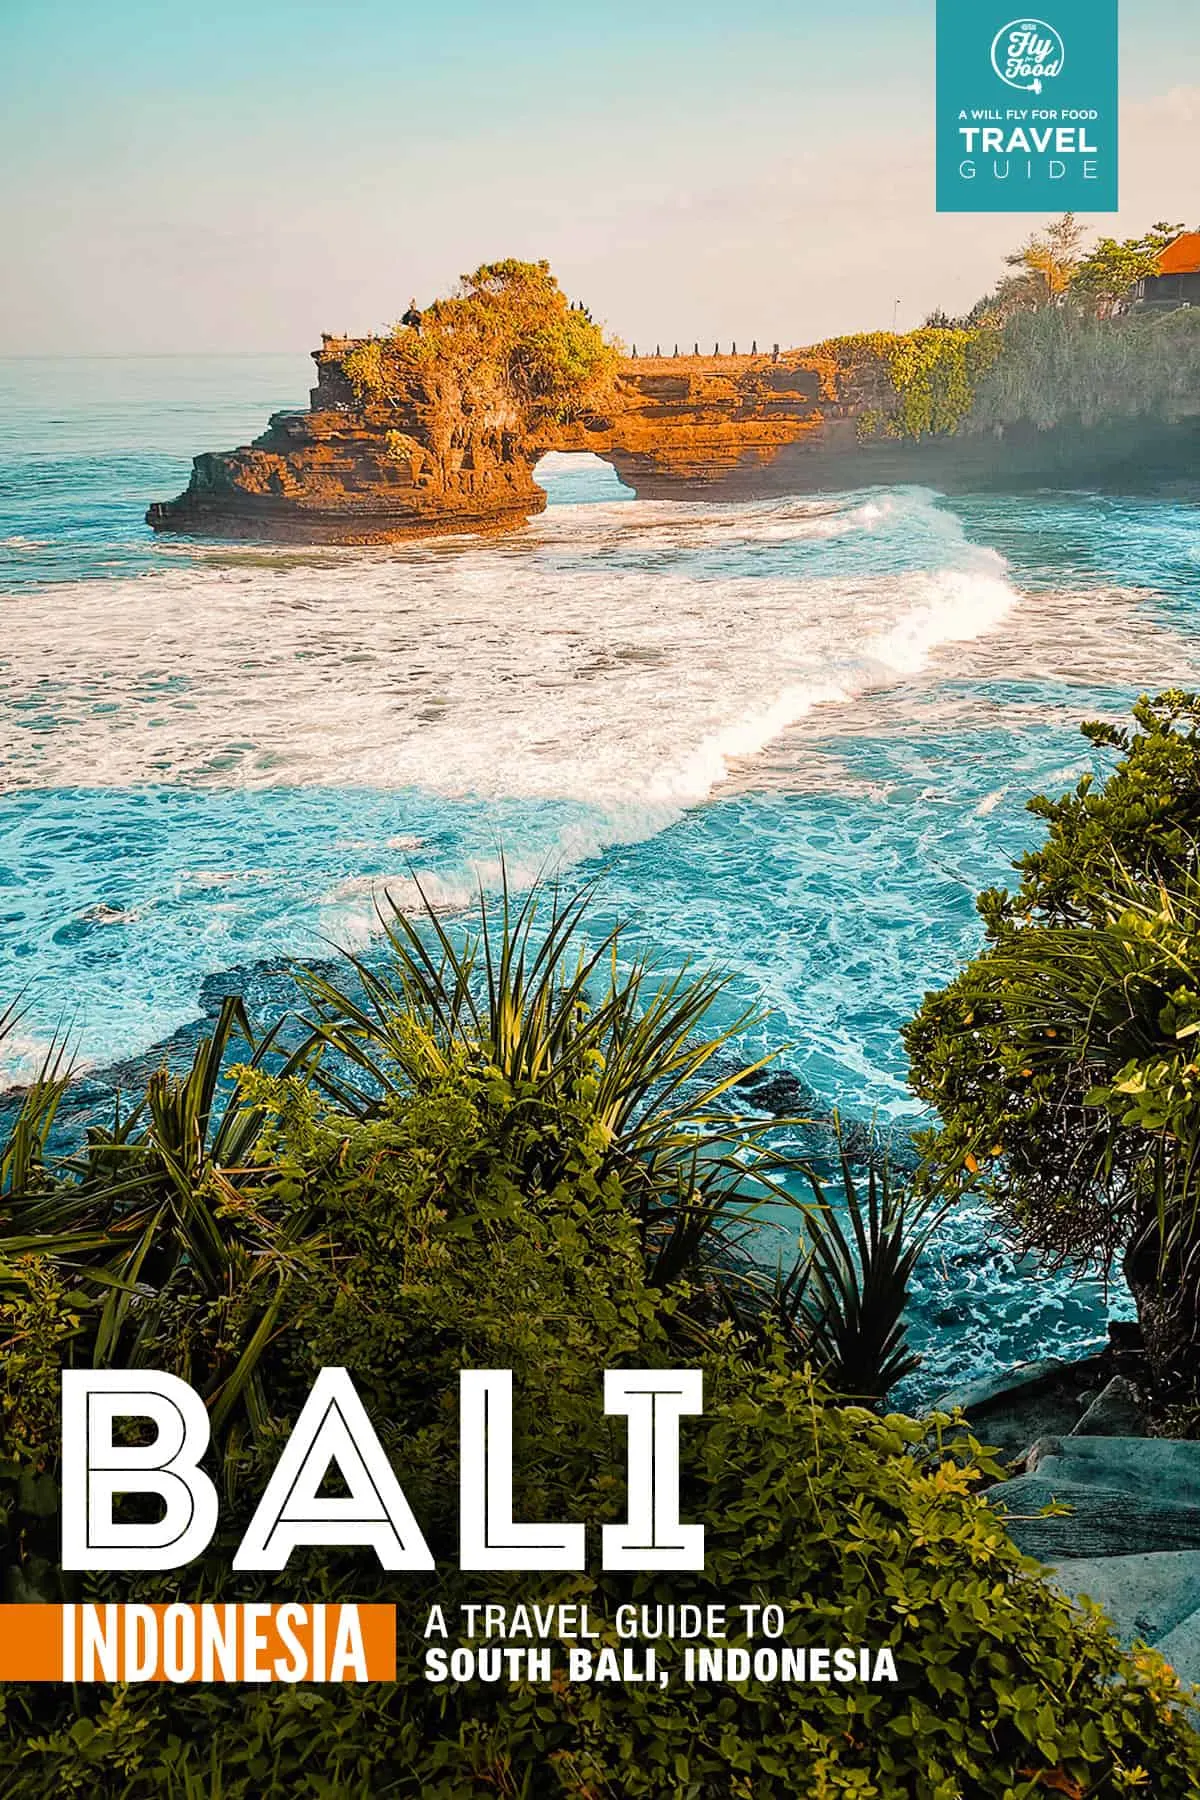 Bali Indonesia  Best Travel Guide, Hotels, Villas, Activities - Bali  Official